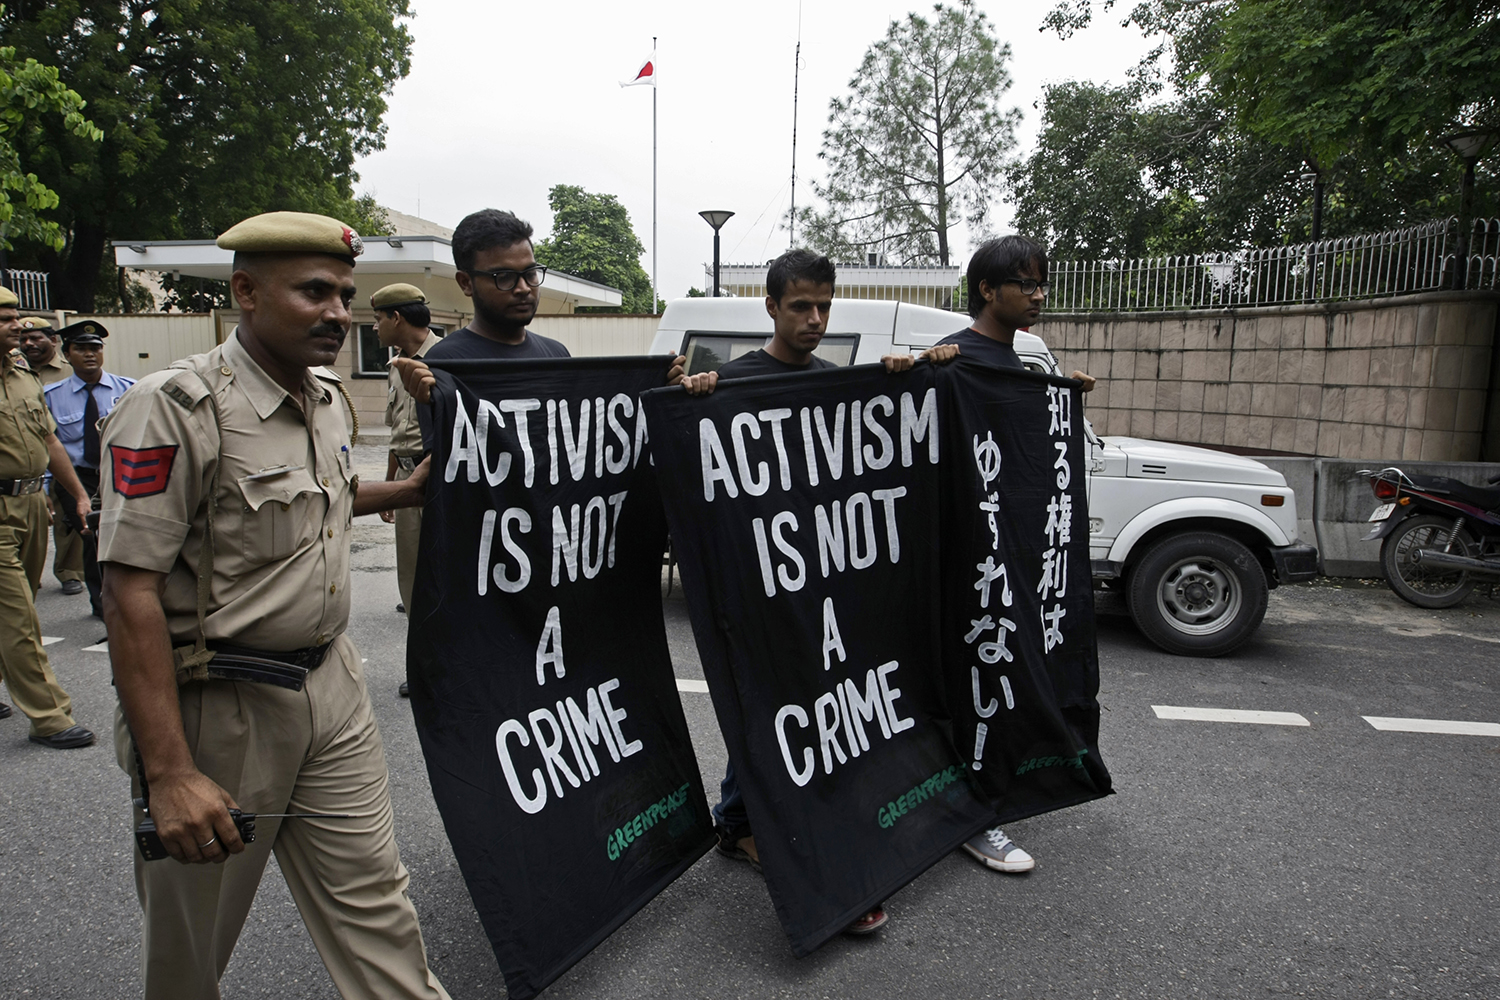 Greenpeace India may be forced to halve staff, operations amid government crackdown